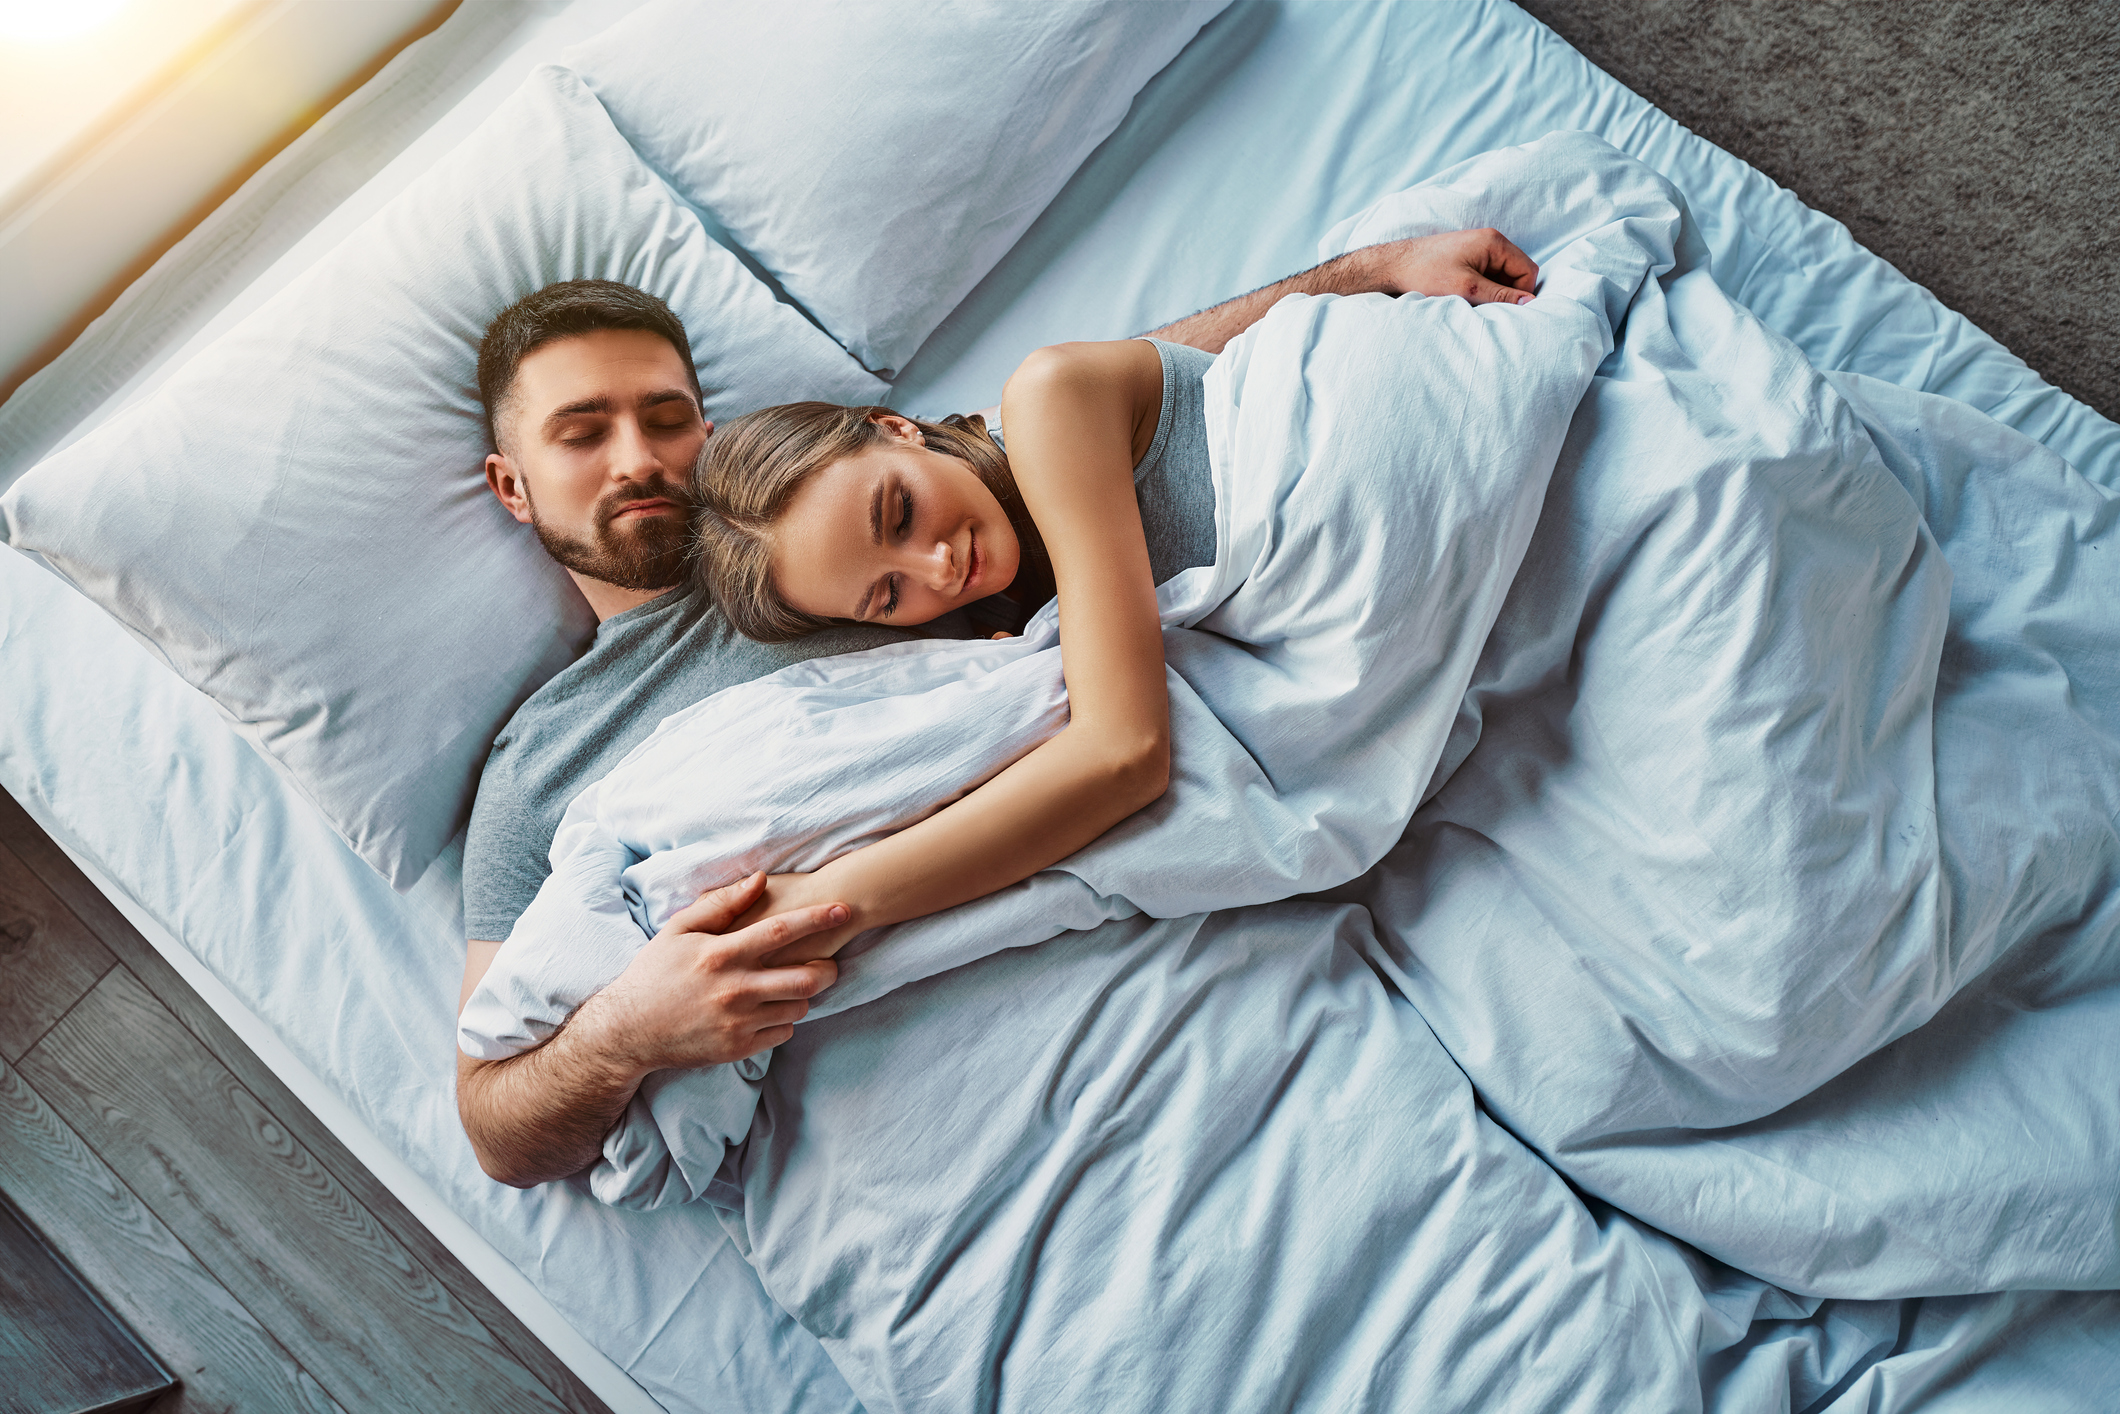 Ought to You Share a Mattress With Your Associate? Sleep Scientists Break It Down